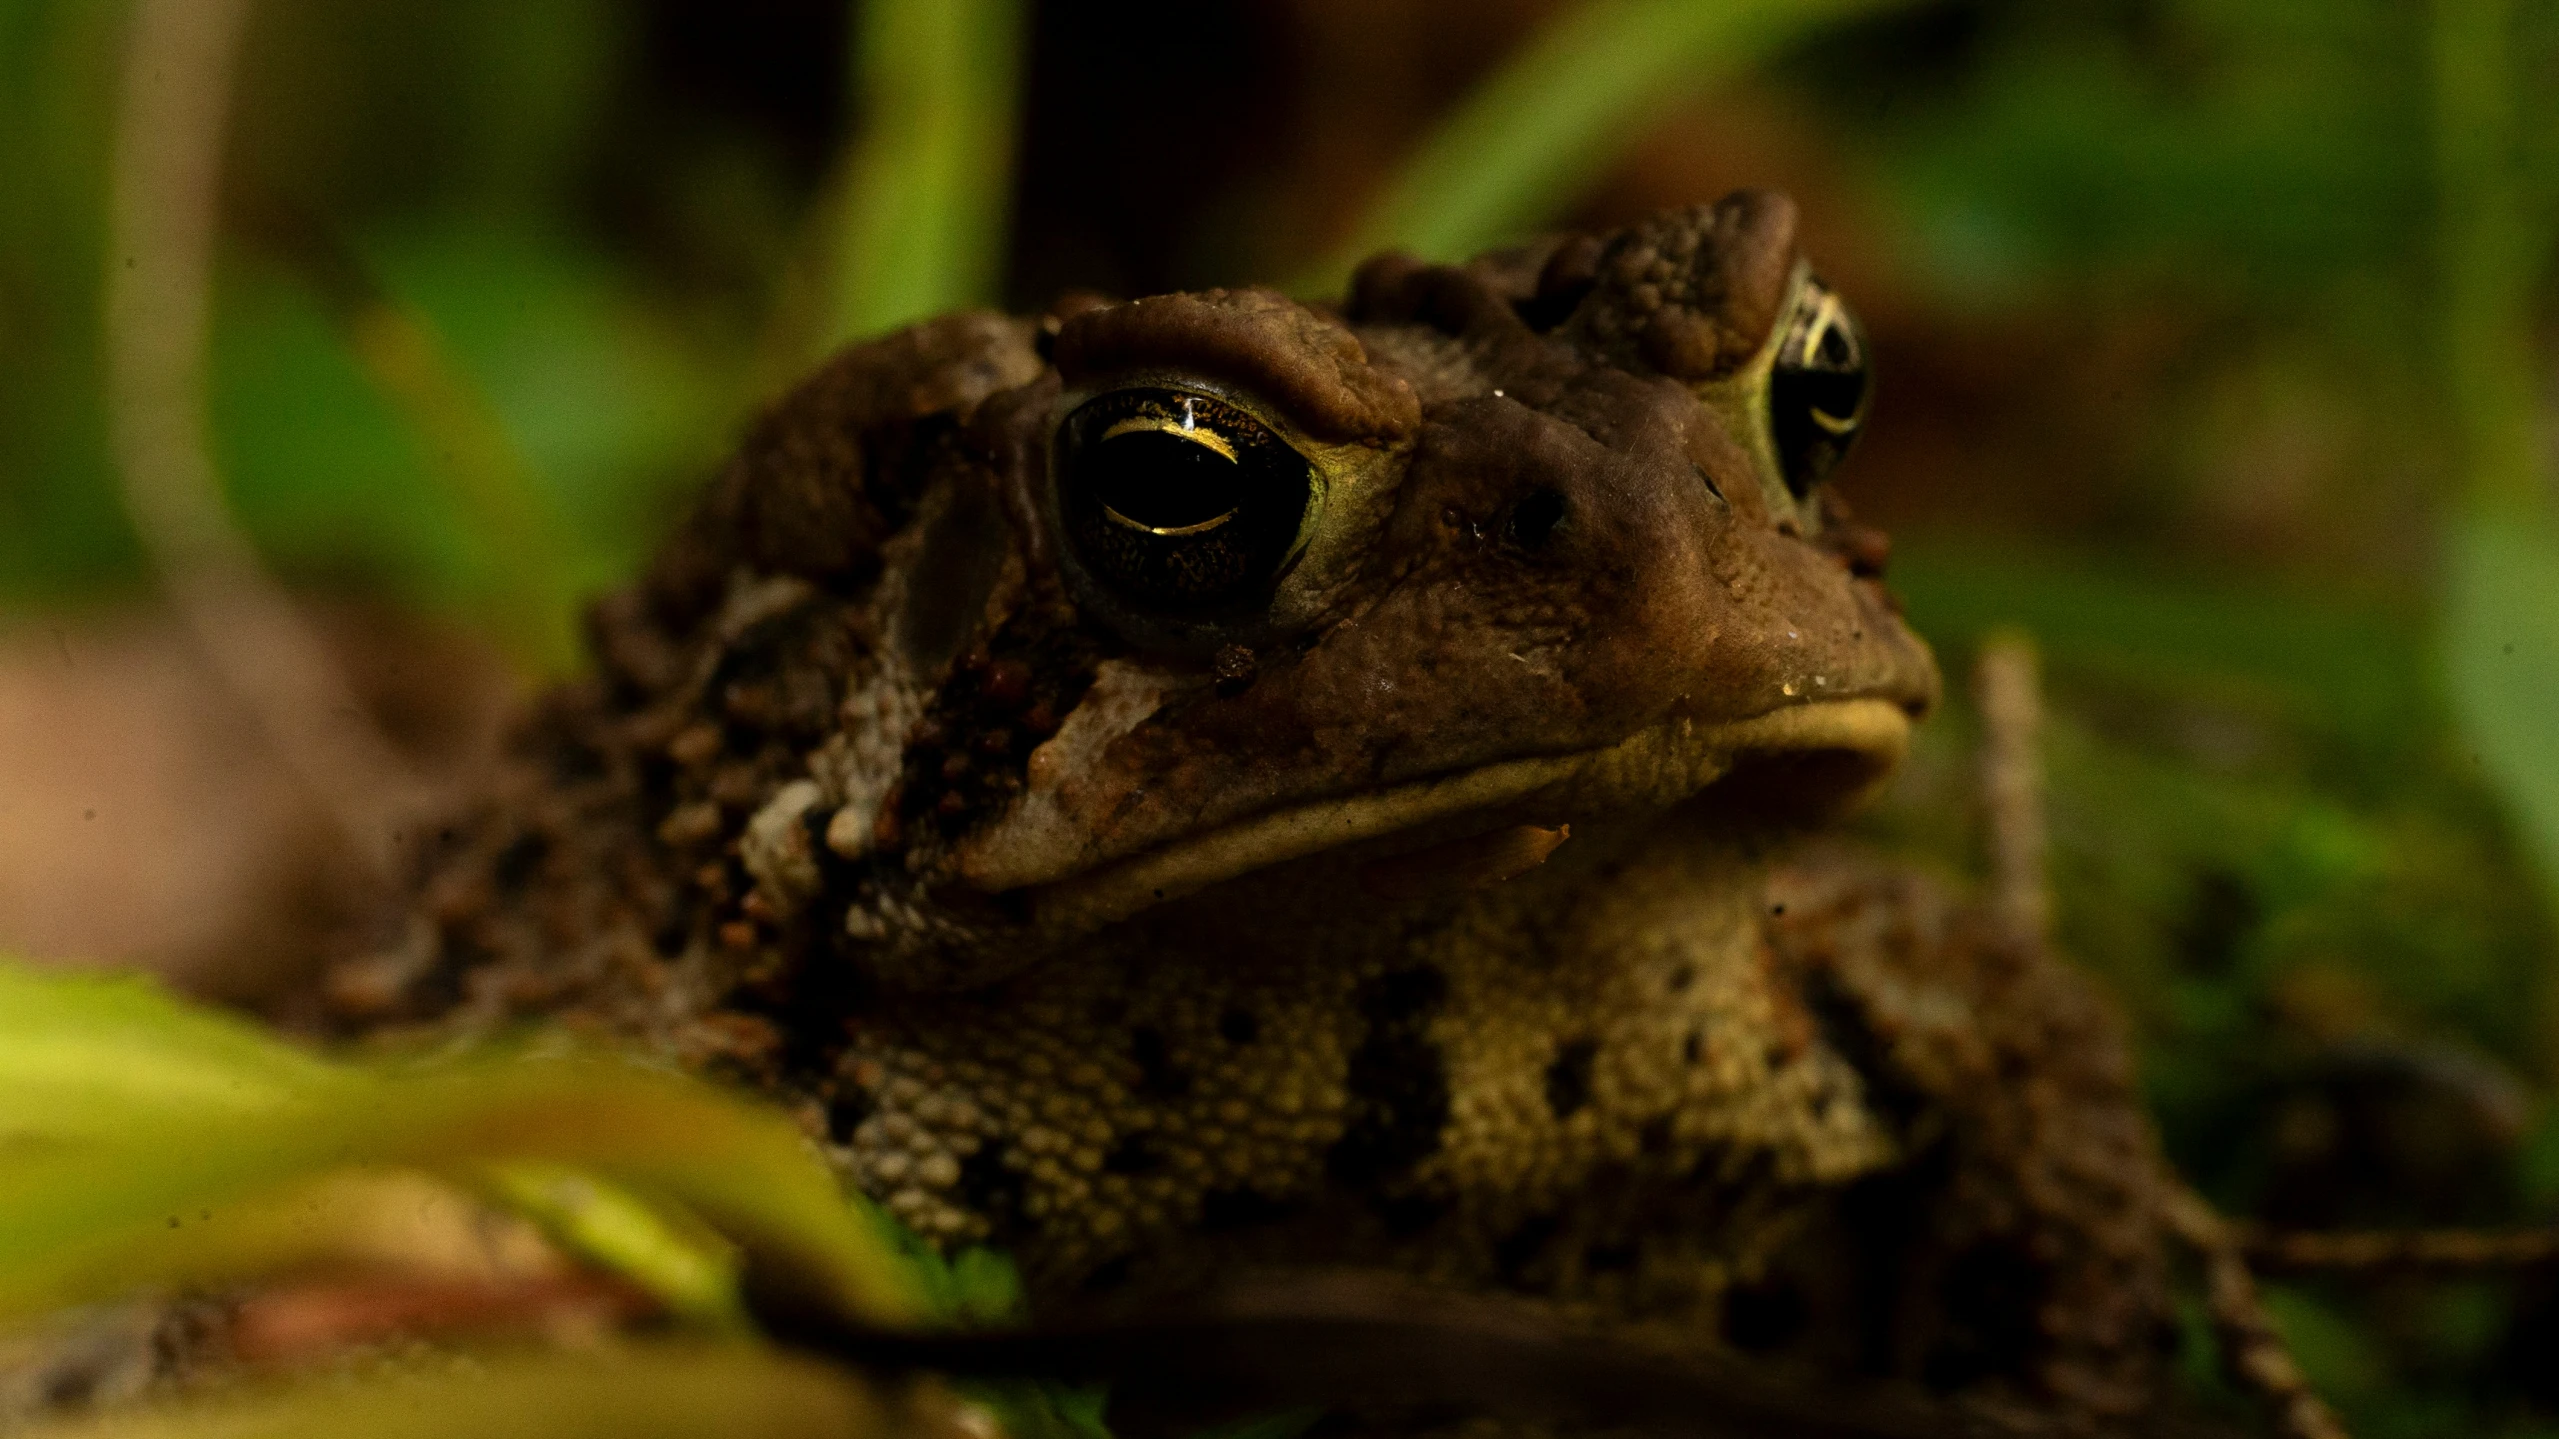 a small toad with black spots sitting on the ground